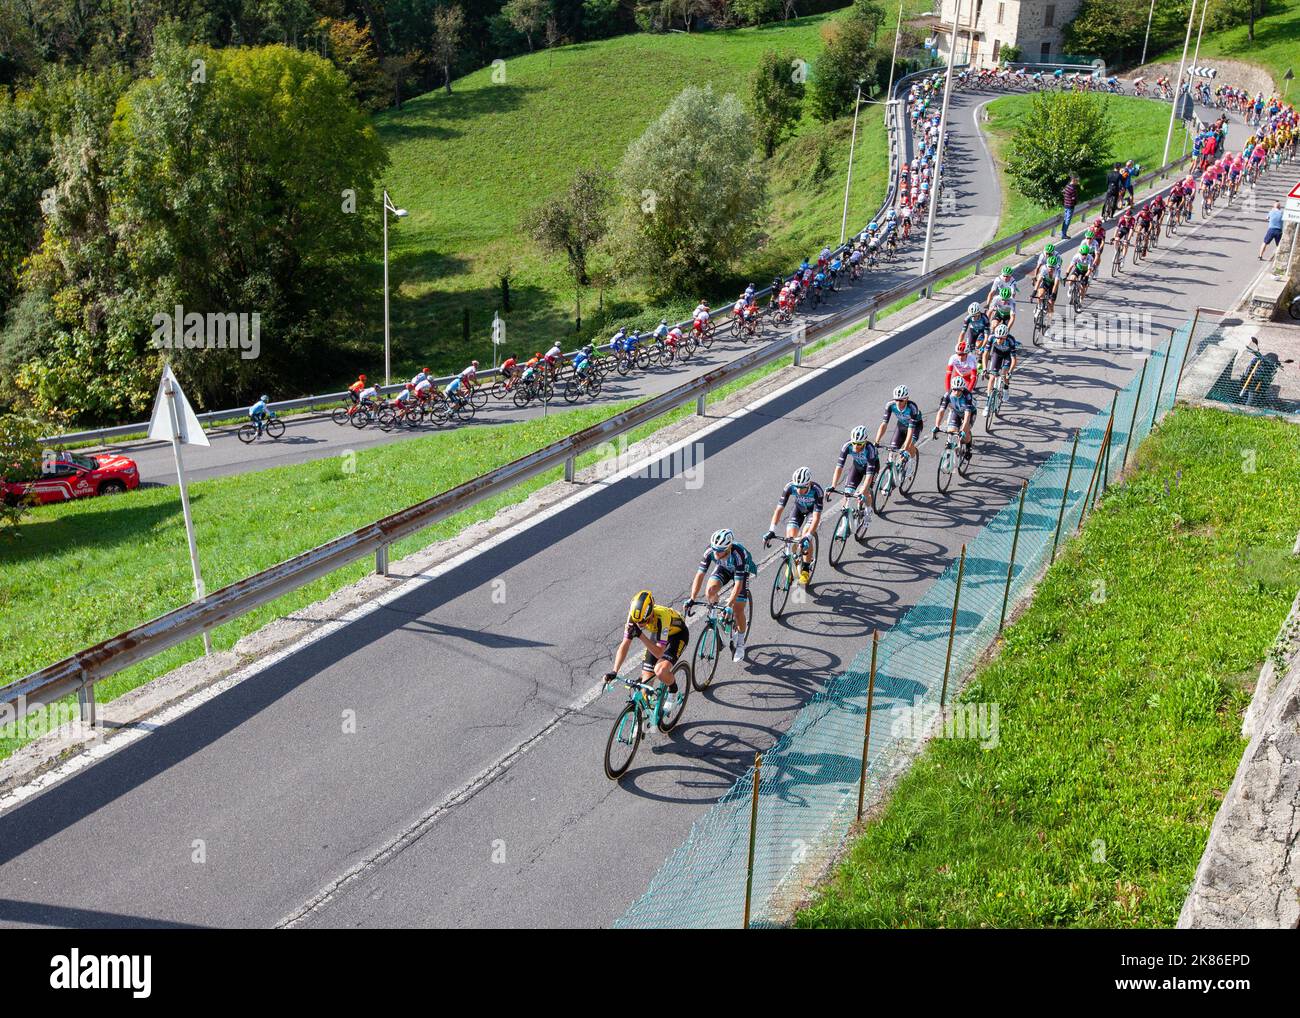 The peloton during the Il Lombardia 2019 race in Lombardia, Italy on Saturday October 12, 2019. Stock Photo